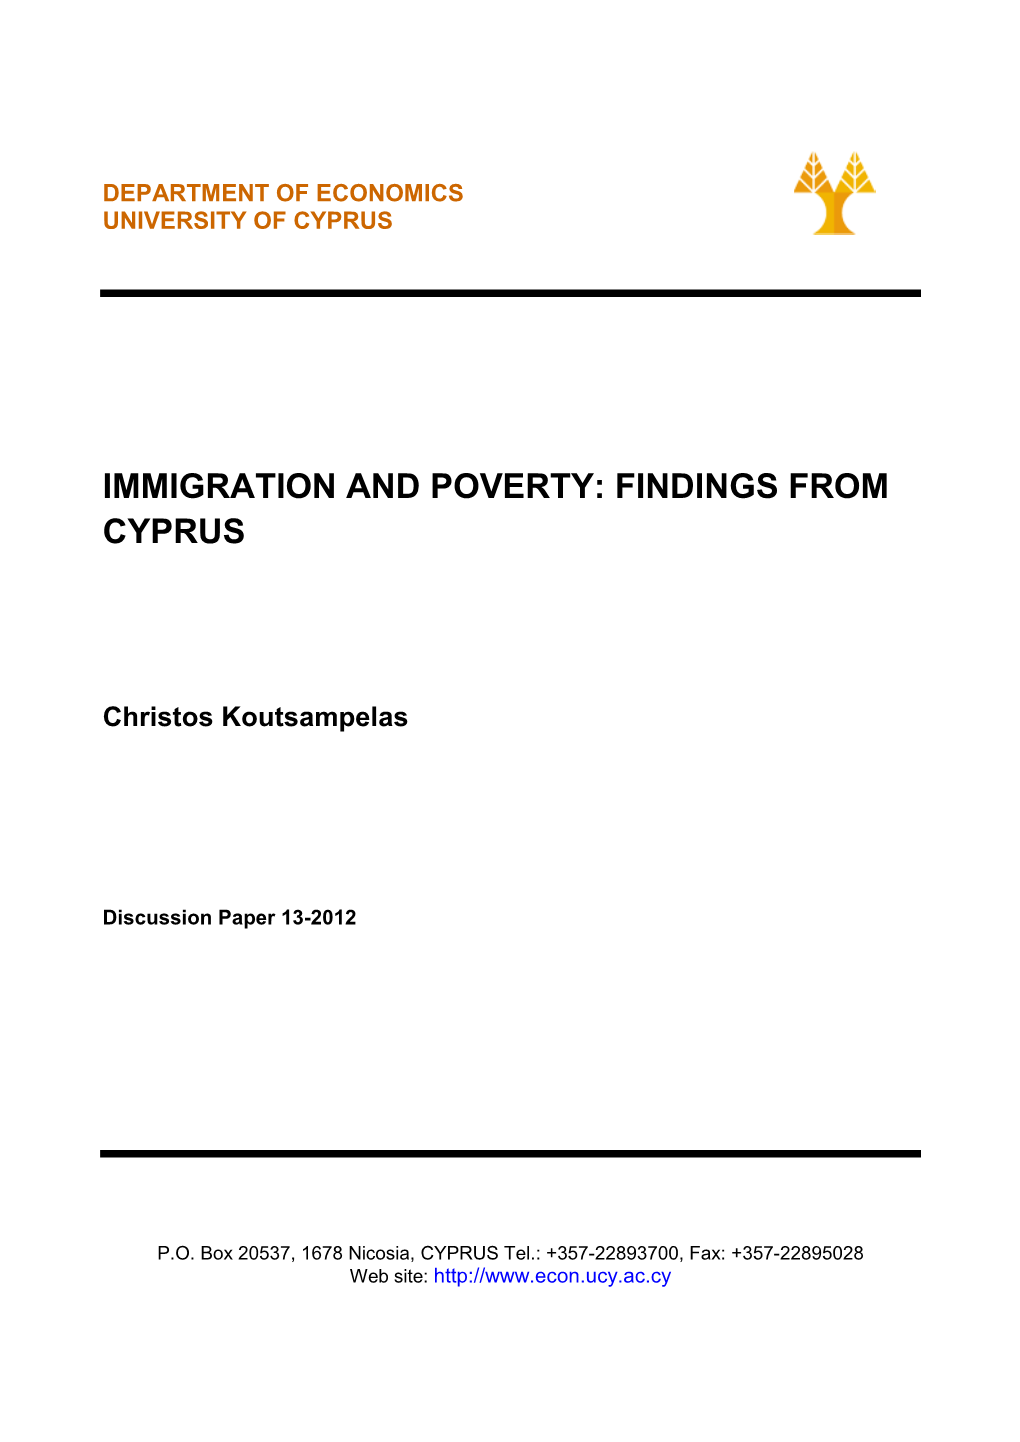 Immigration and Poverty: Findings from Cyprus